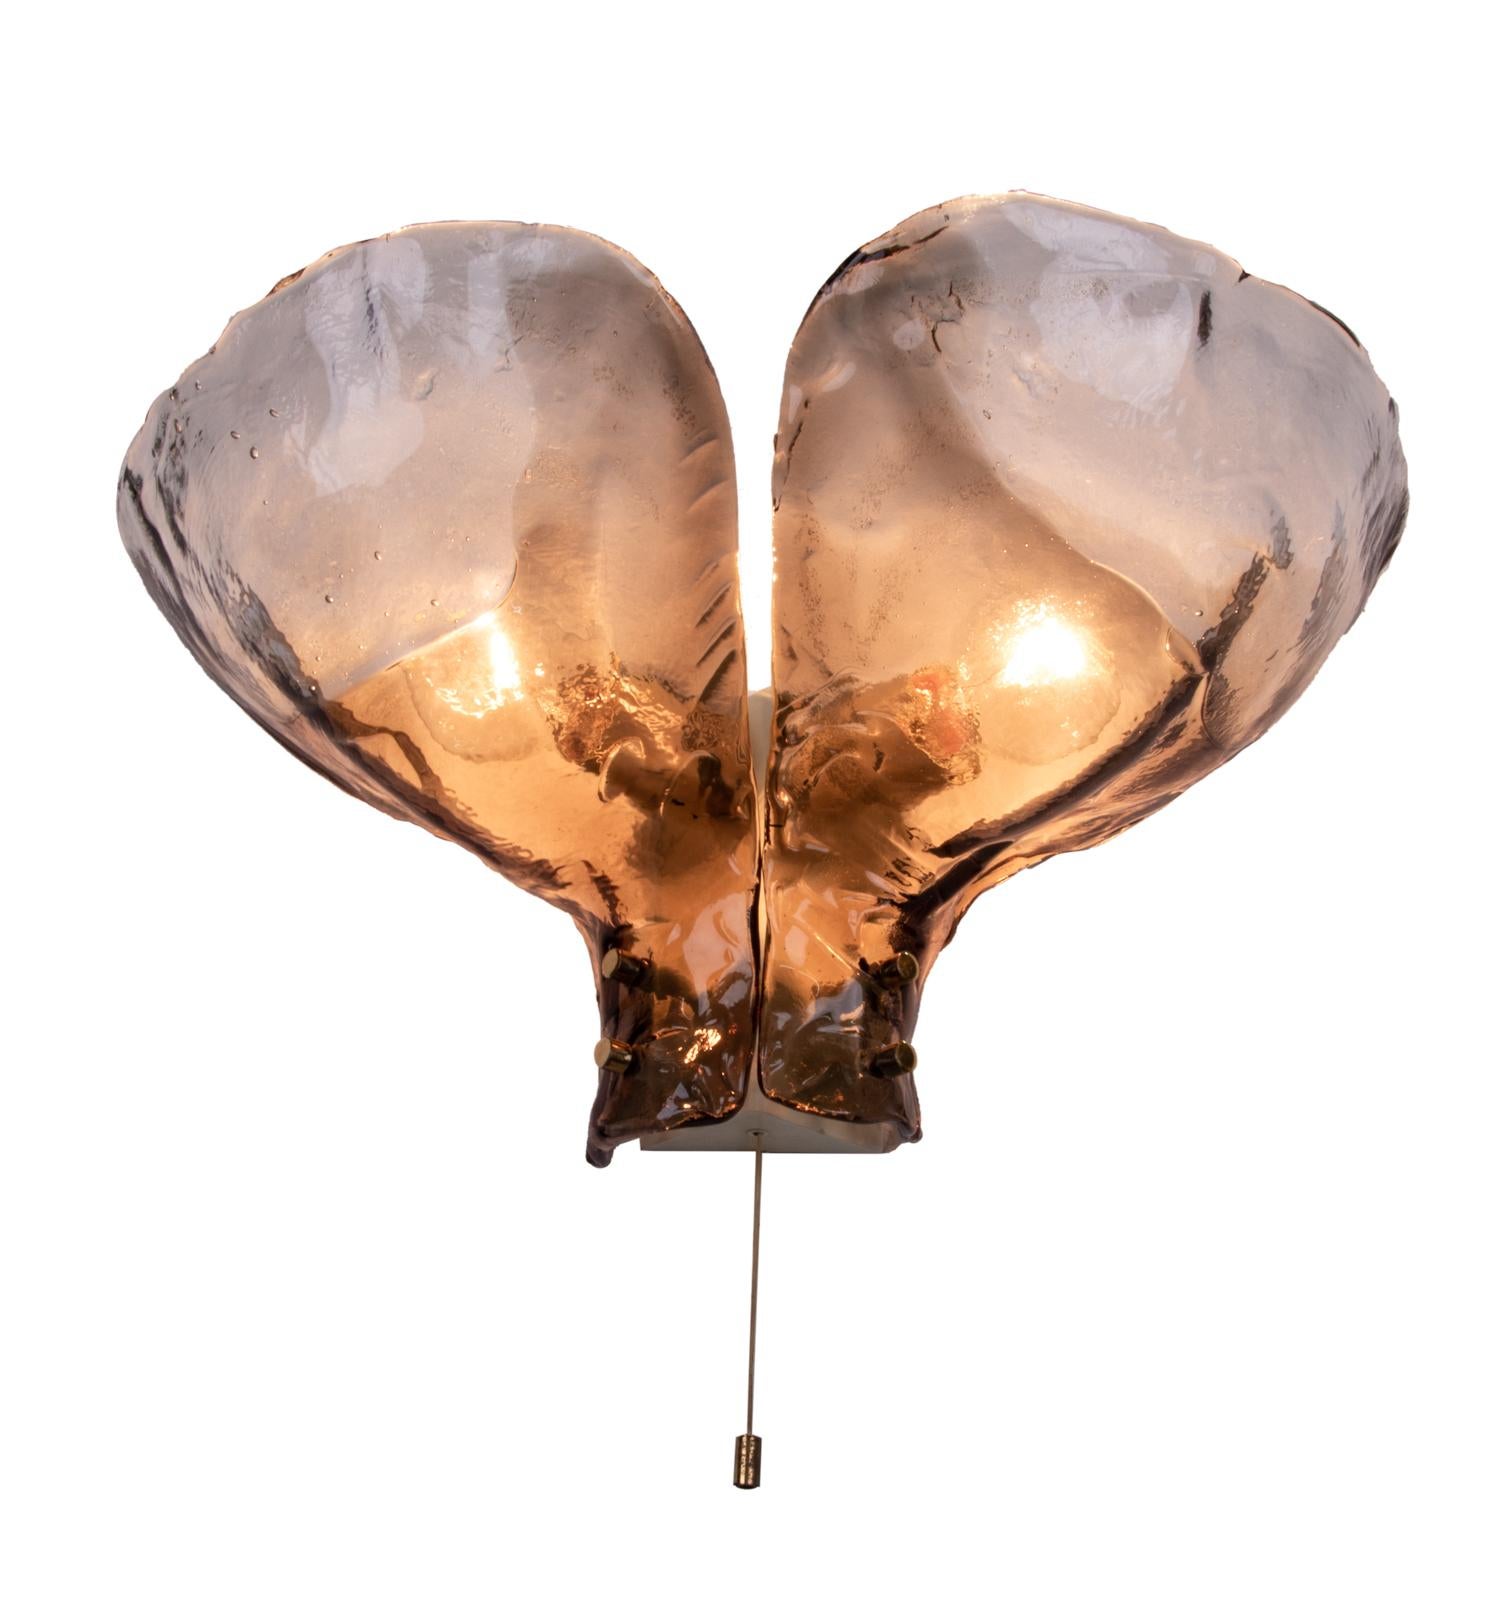 Elegant large wall light designed by J.T. Kalmar made of amber Murano glass elements fixed on a nickel backplate. Beautiful play of light when lit. Gem from the time. With this light you make a clear statement in your interior design. A real